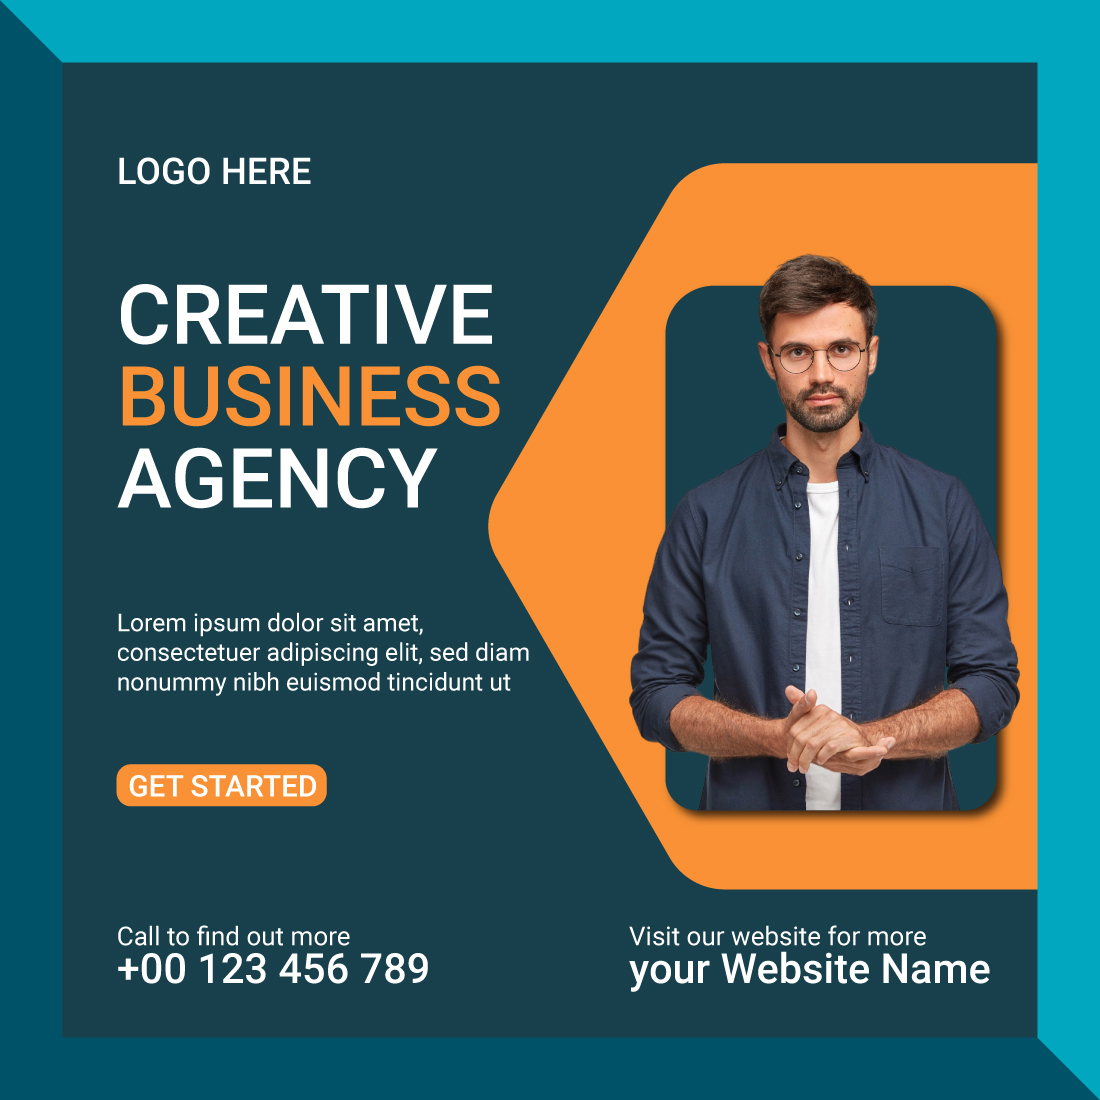 Creative Business Agency Social Media Post Template cover image.